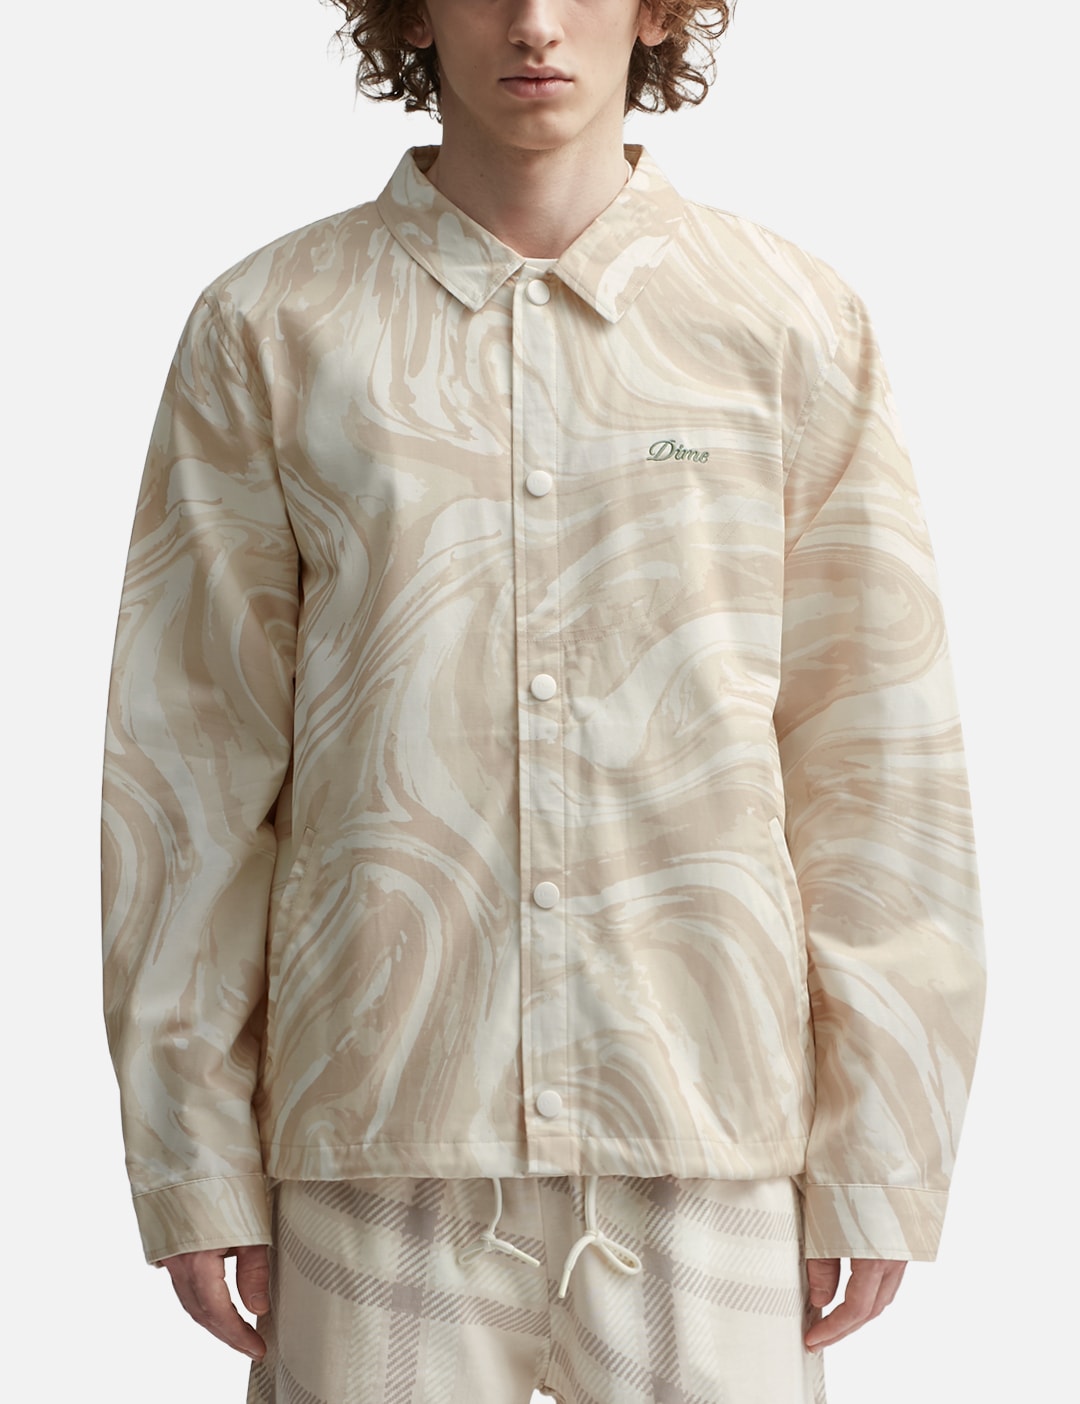 Brain Dead - ROLL CAST MESH OVERLAY FISHING JACKET  HBX - Globally Curated  Fashion and Lifestyle by Hypebeast